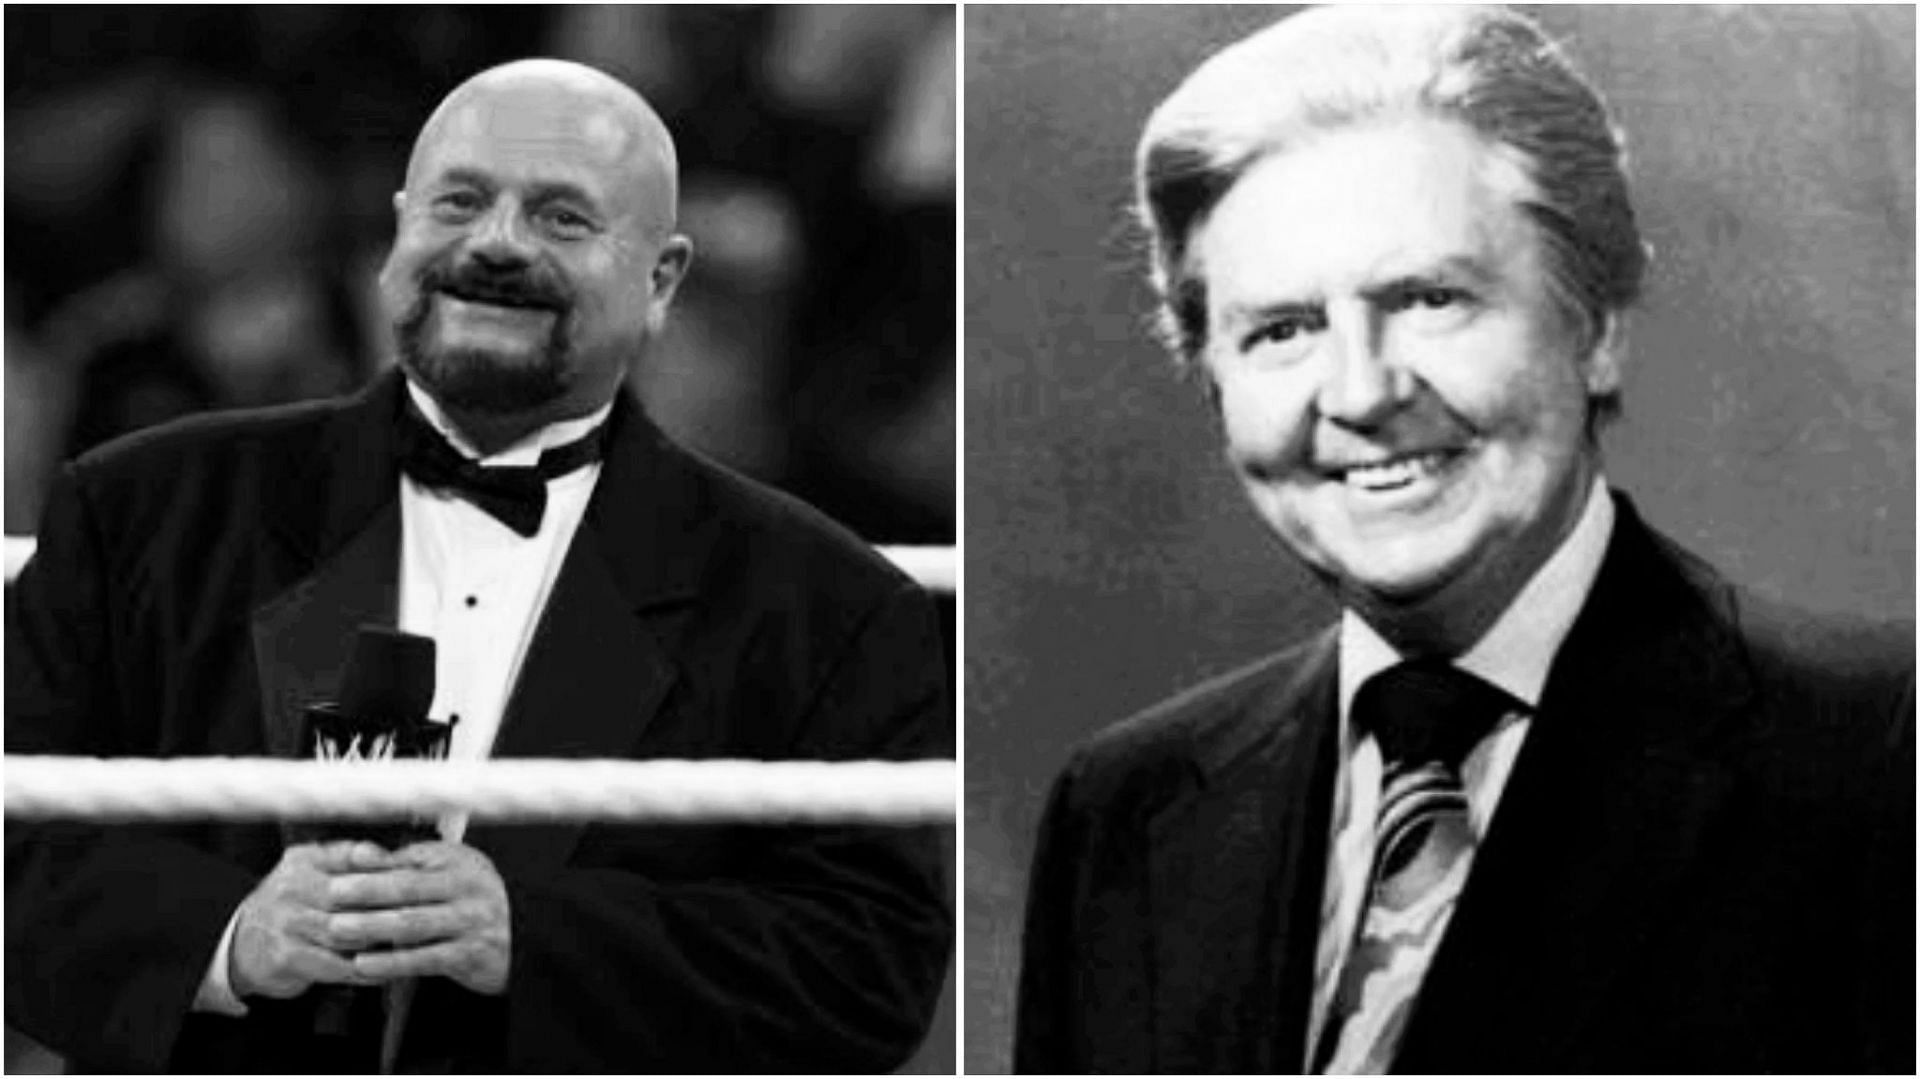 Howard Finkel was the first employee signed by Vince K. McMahon.